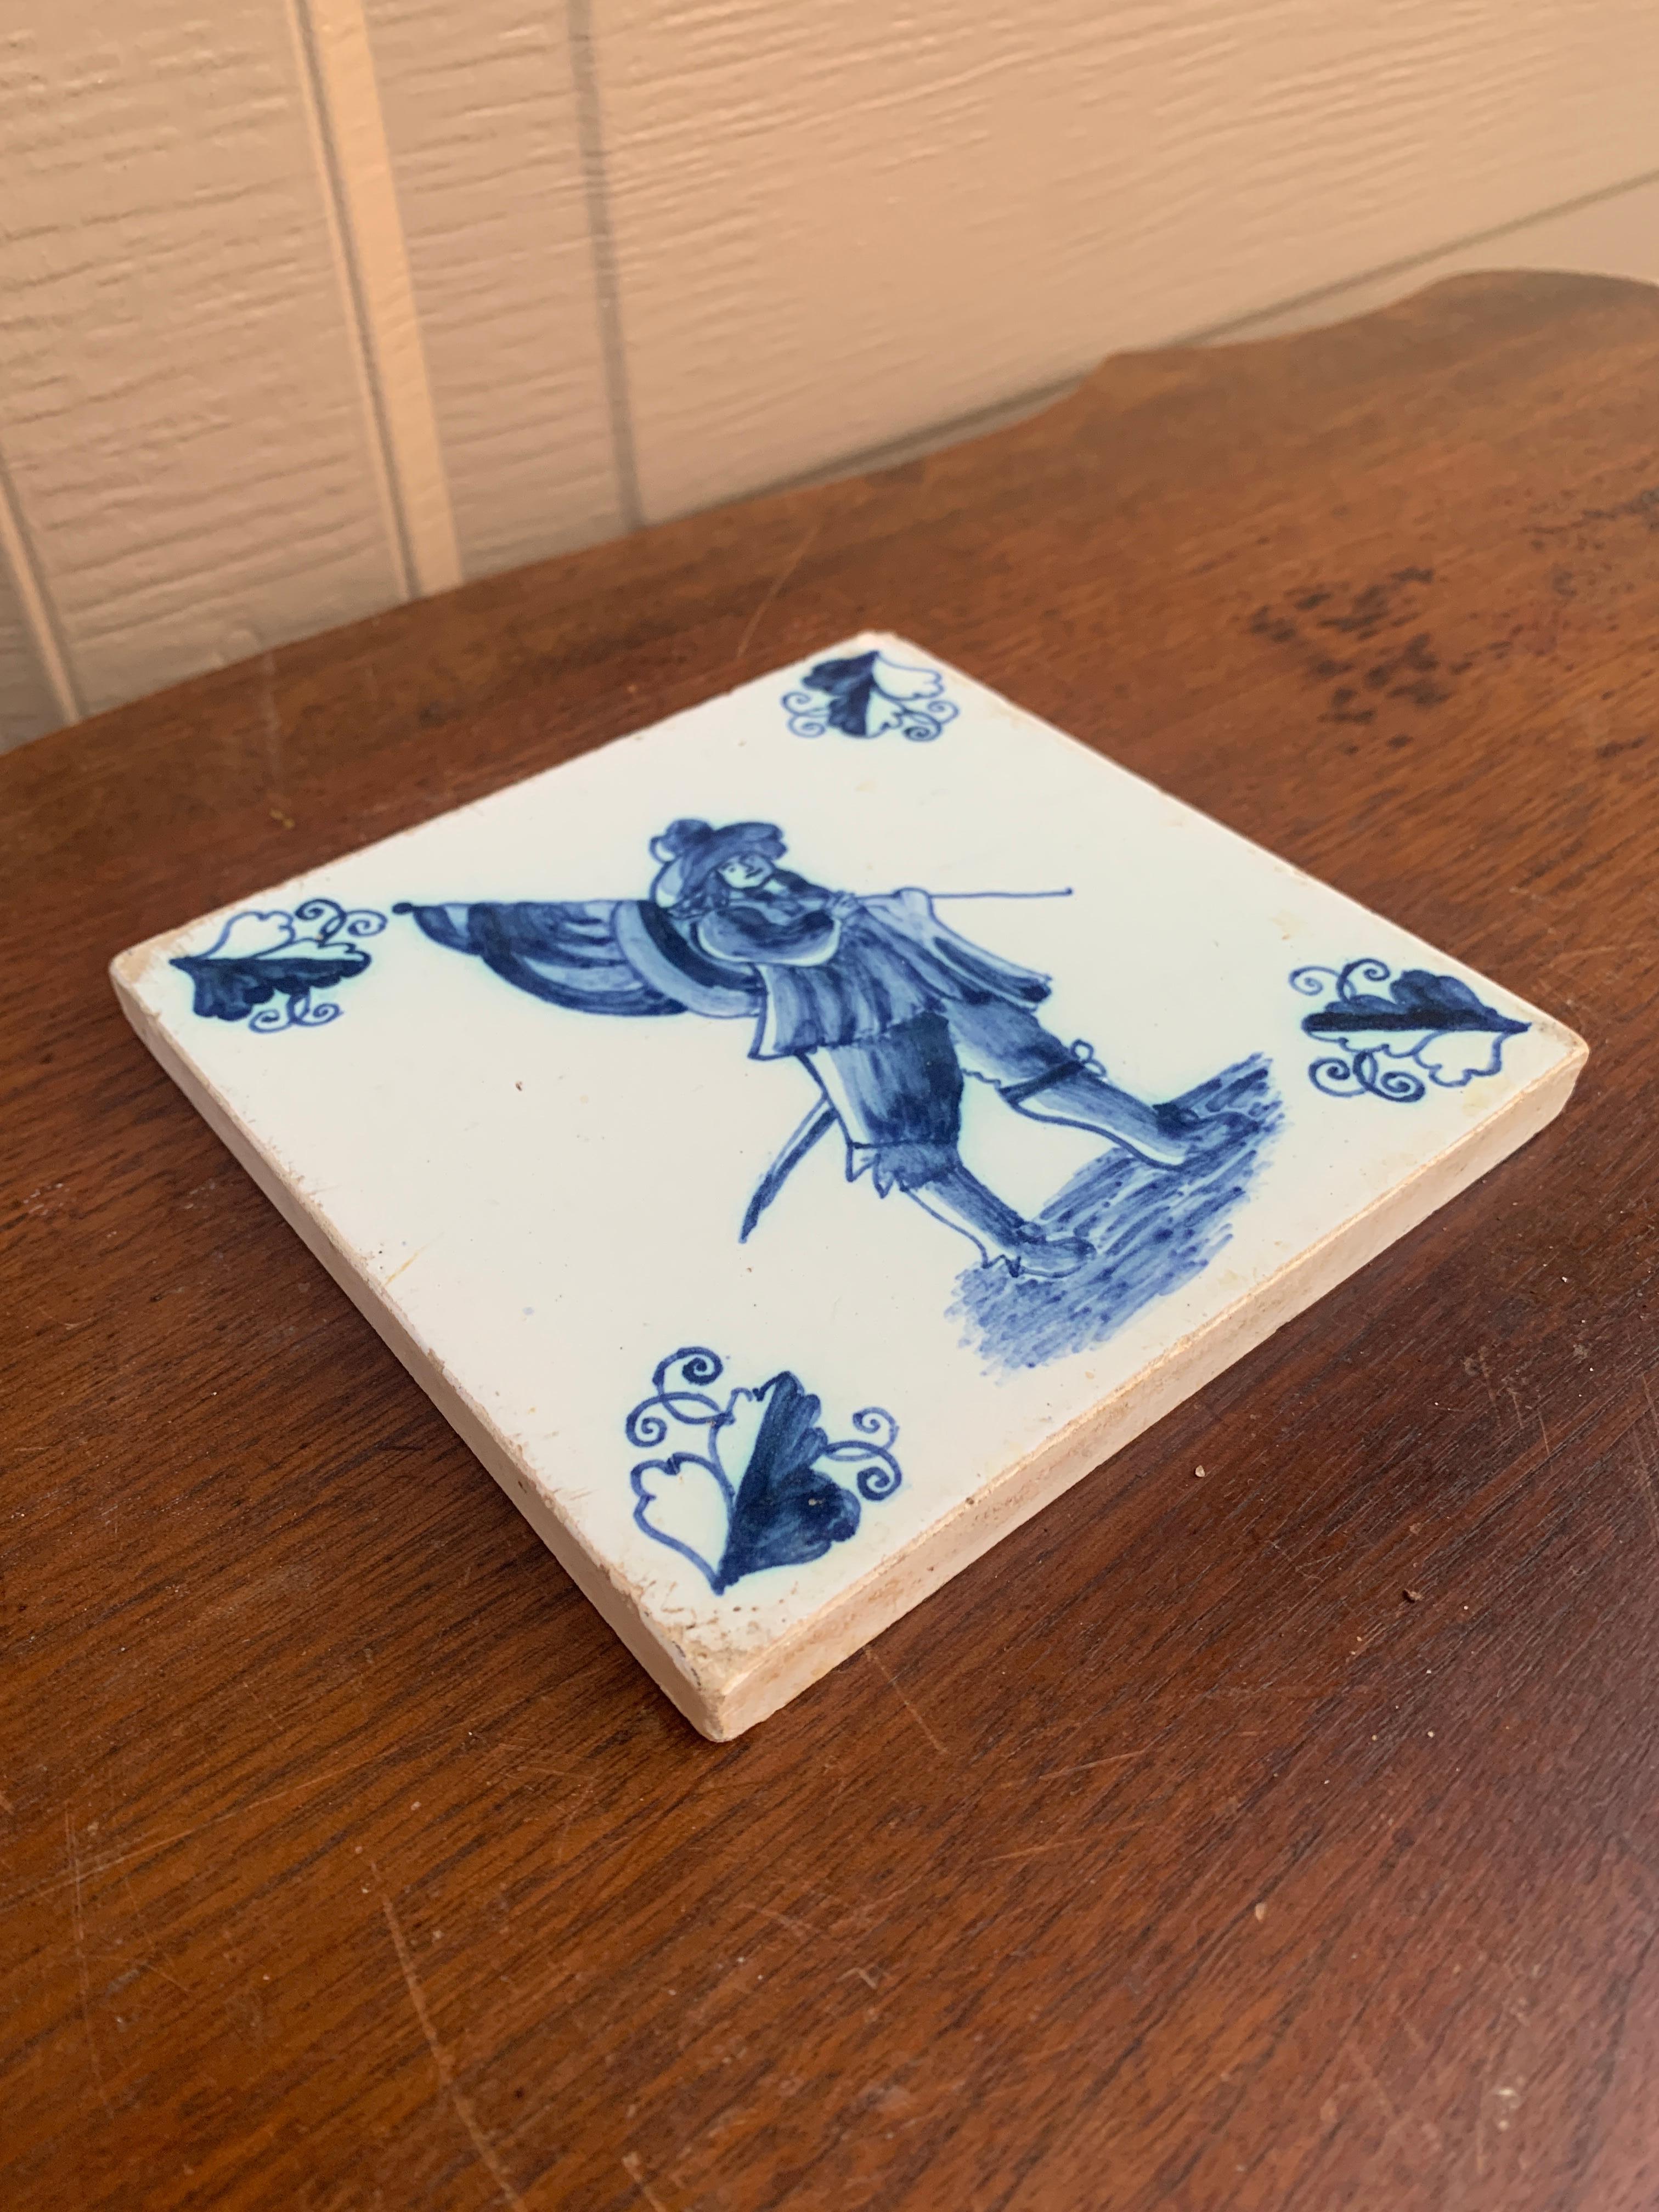 Antique Dutch Delft Style Blue and White Tile Featuring a Soldier In Good Condition For Sale In Elkhart, IN